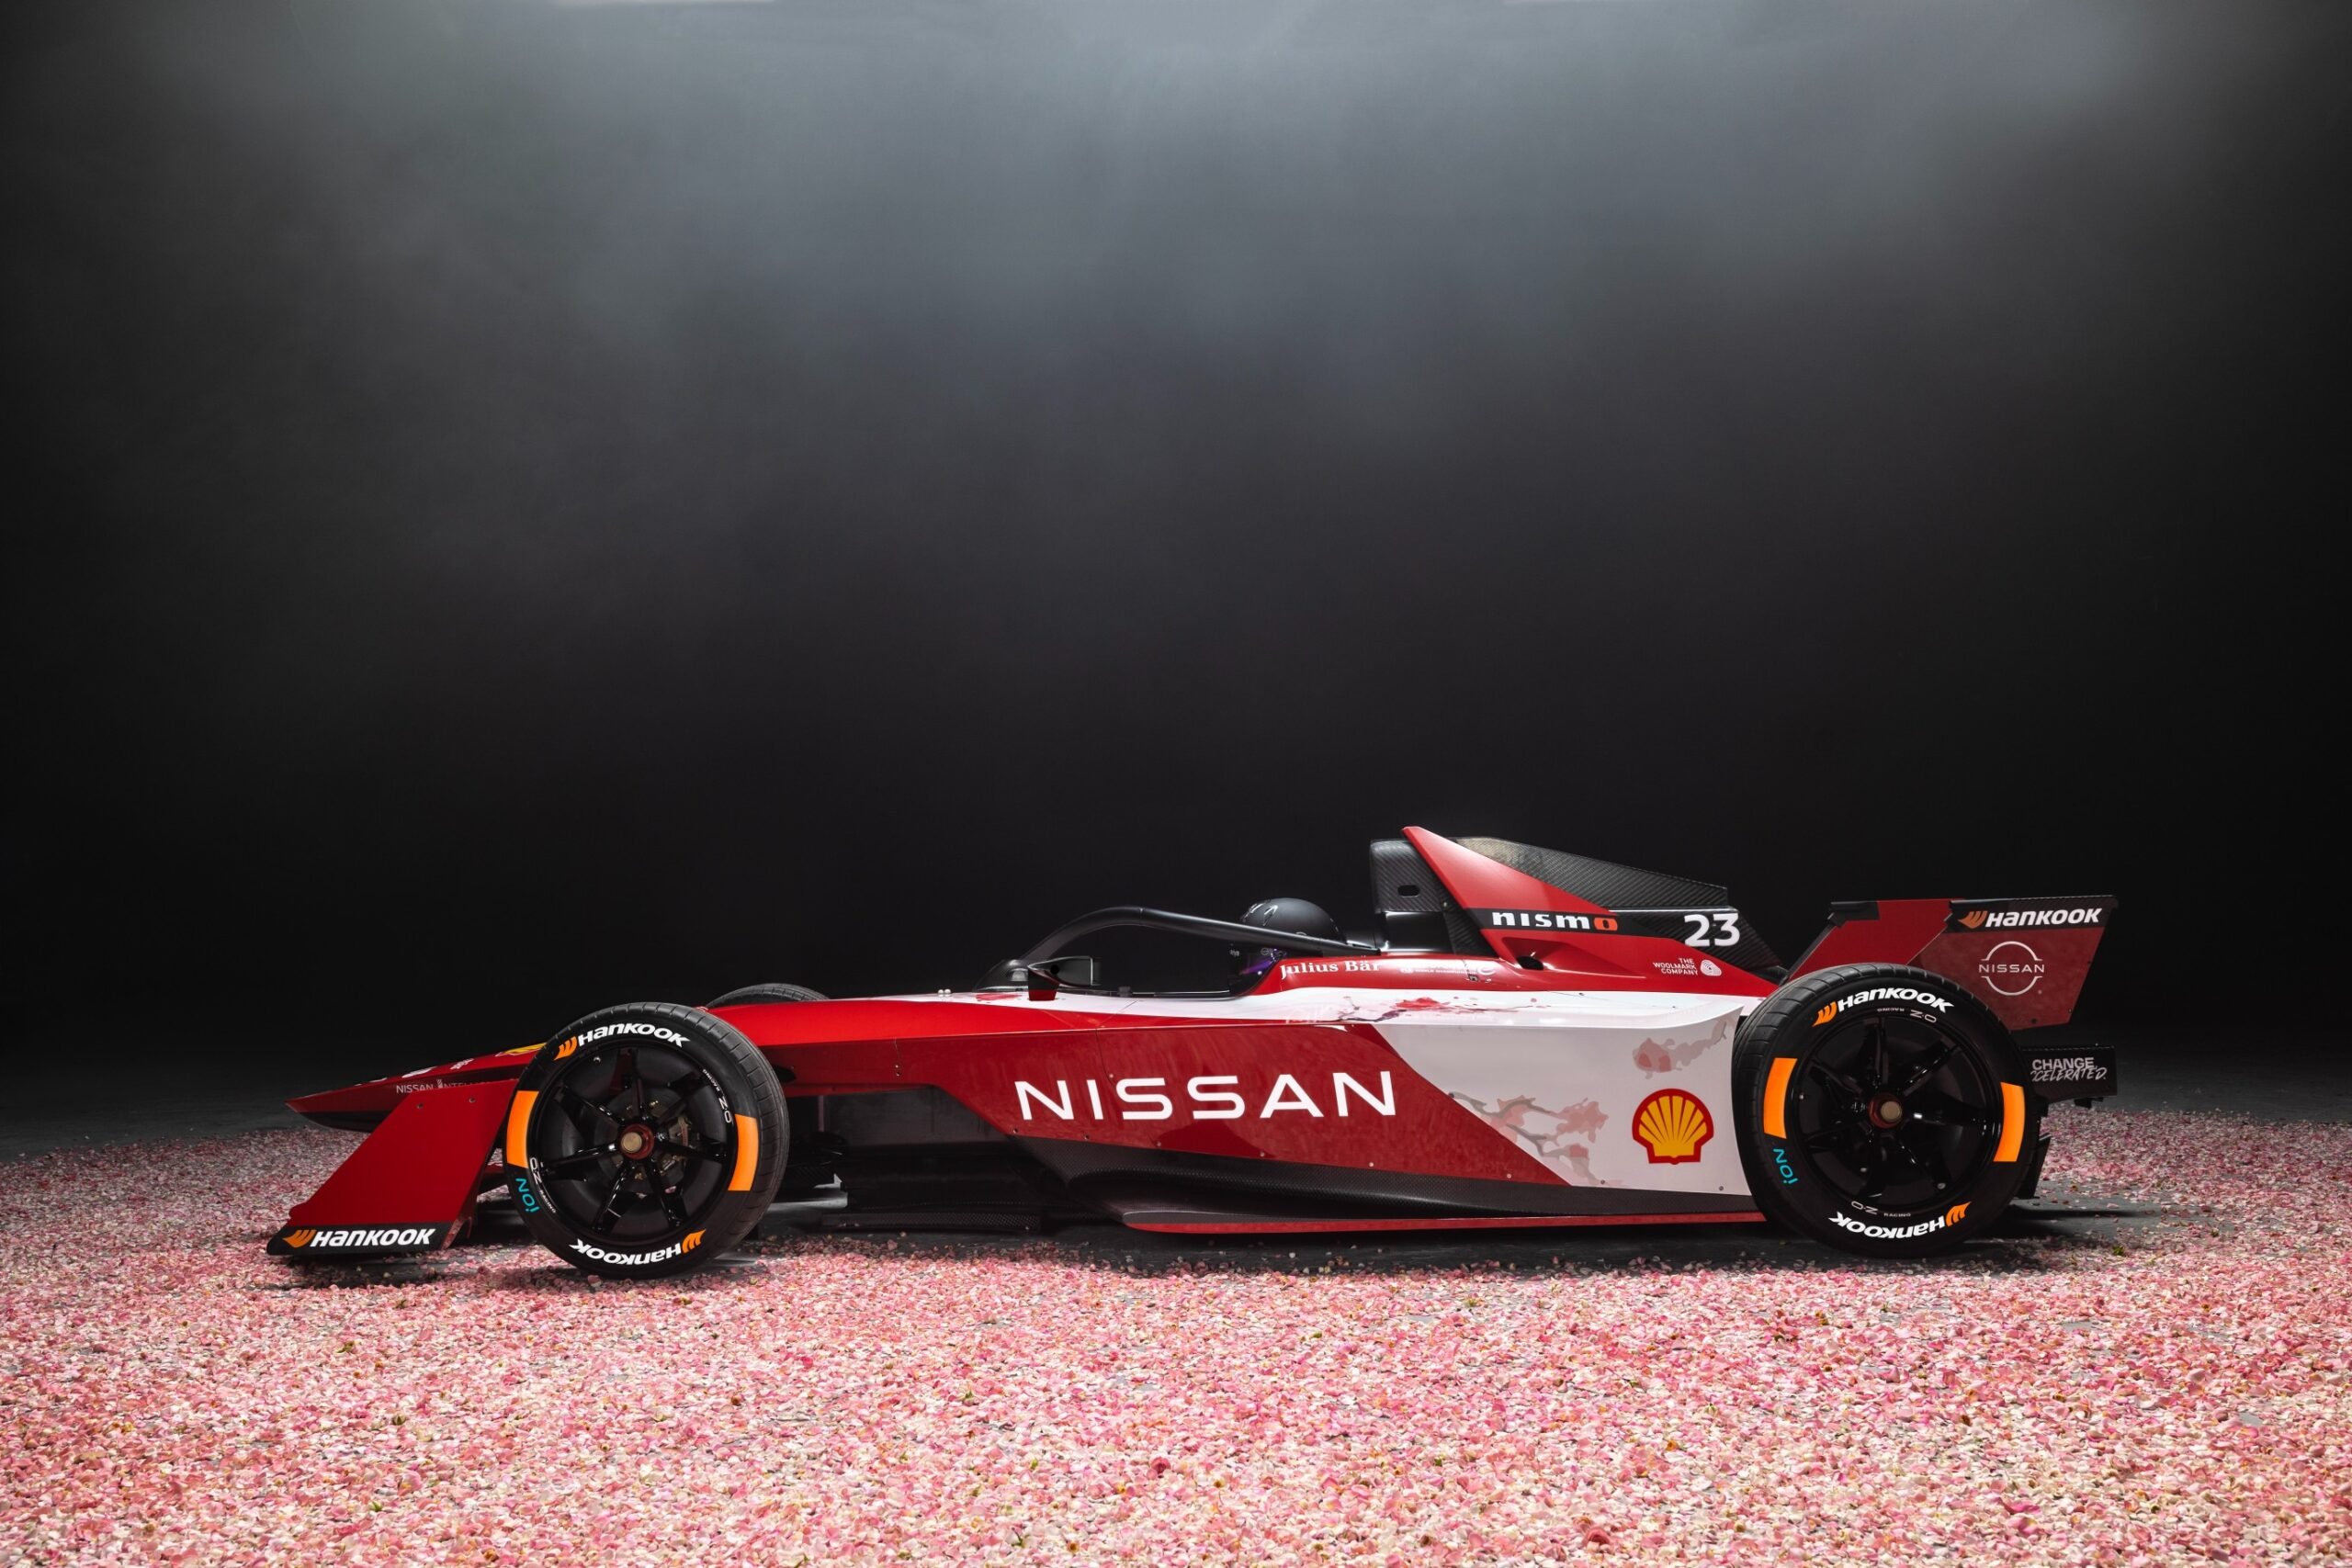 Nissan Formula E Team races into a new electrification era with the unveil of striking livery for Season 9